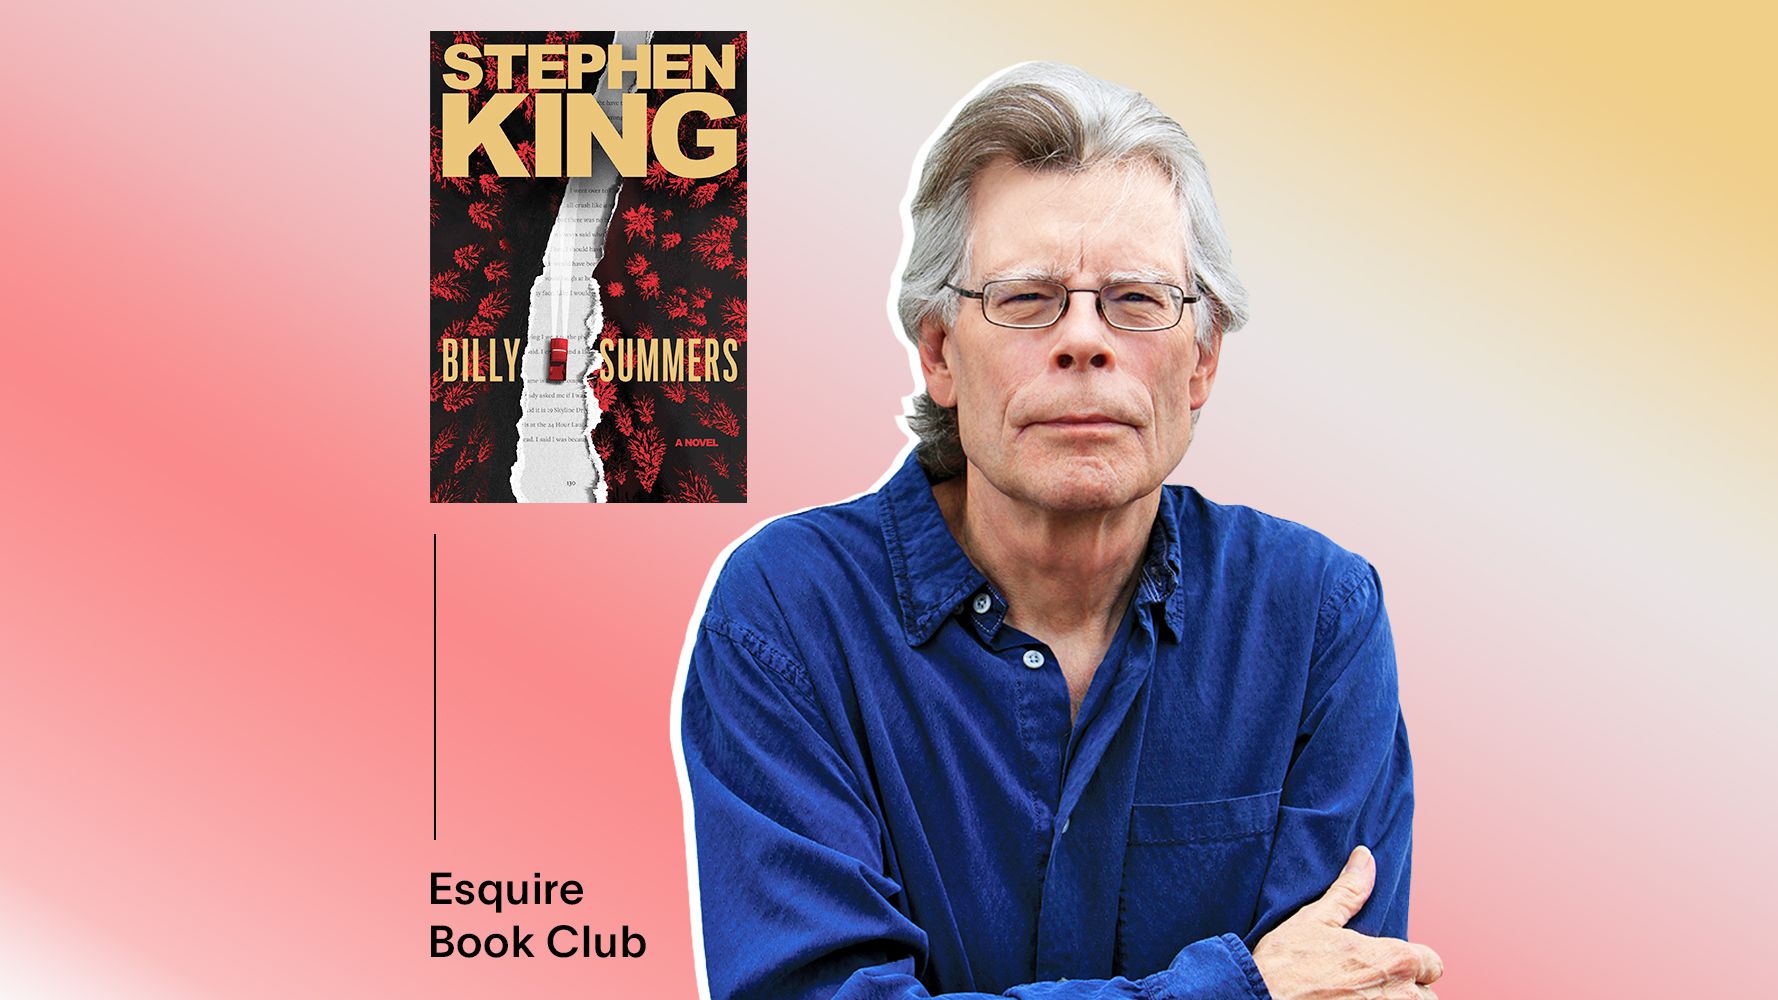 Stephen King 'Billy Summers' Interview 2021 - Stephen King on How